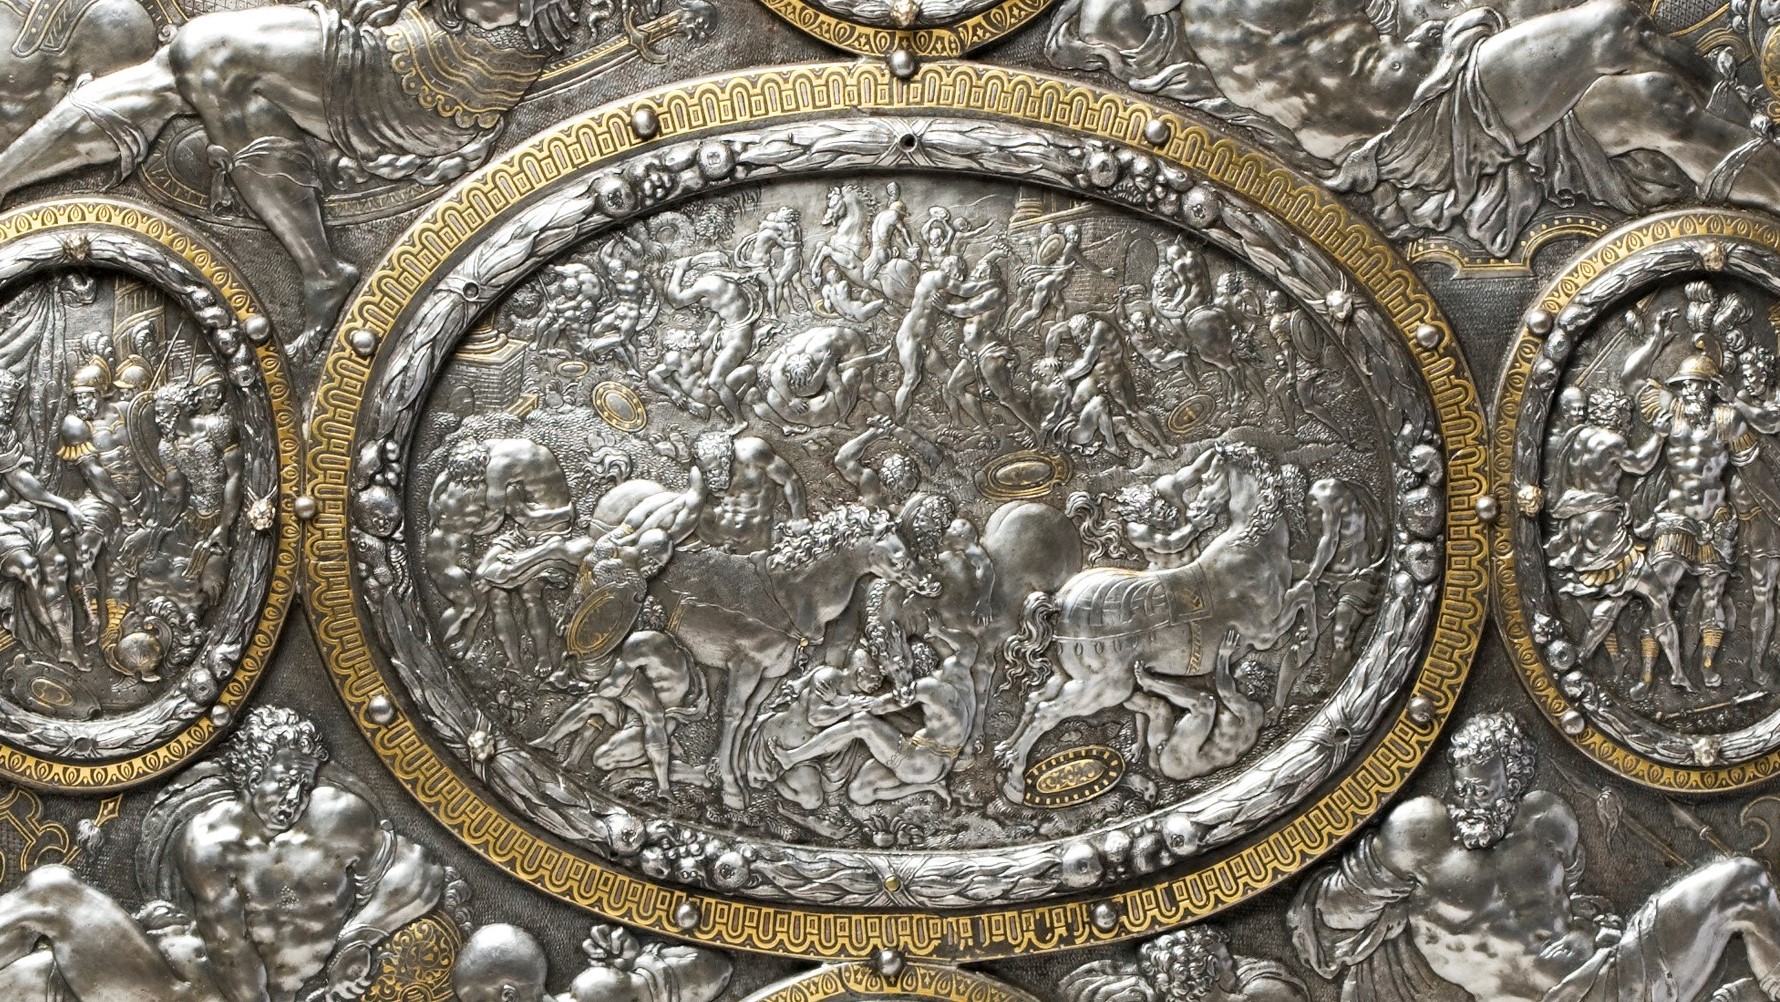 Detail of the centre decoration on the shield depicting a fight between foot soldiers and mounted men. 